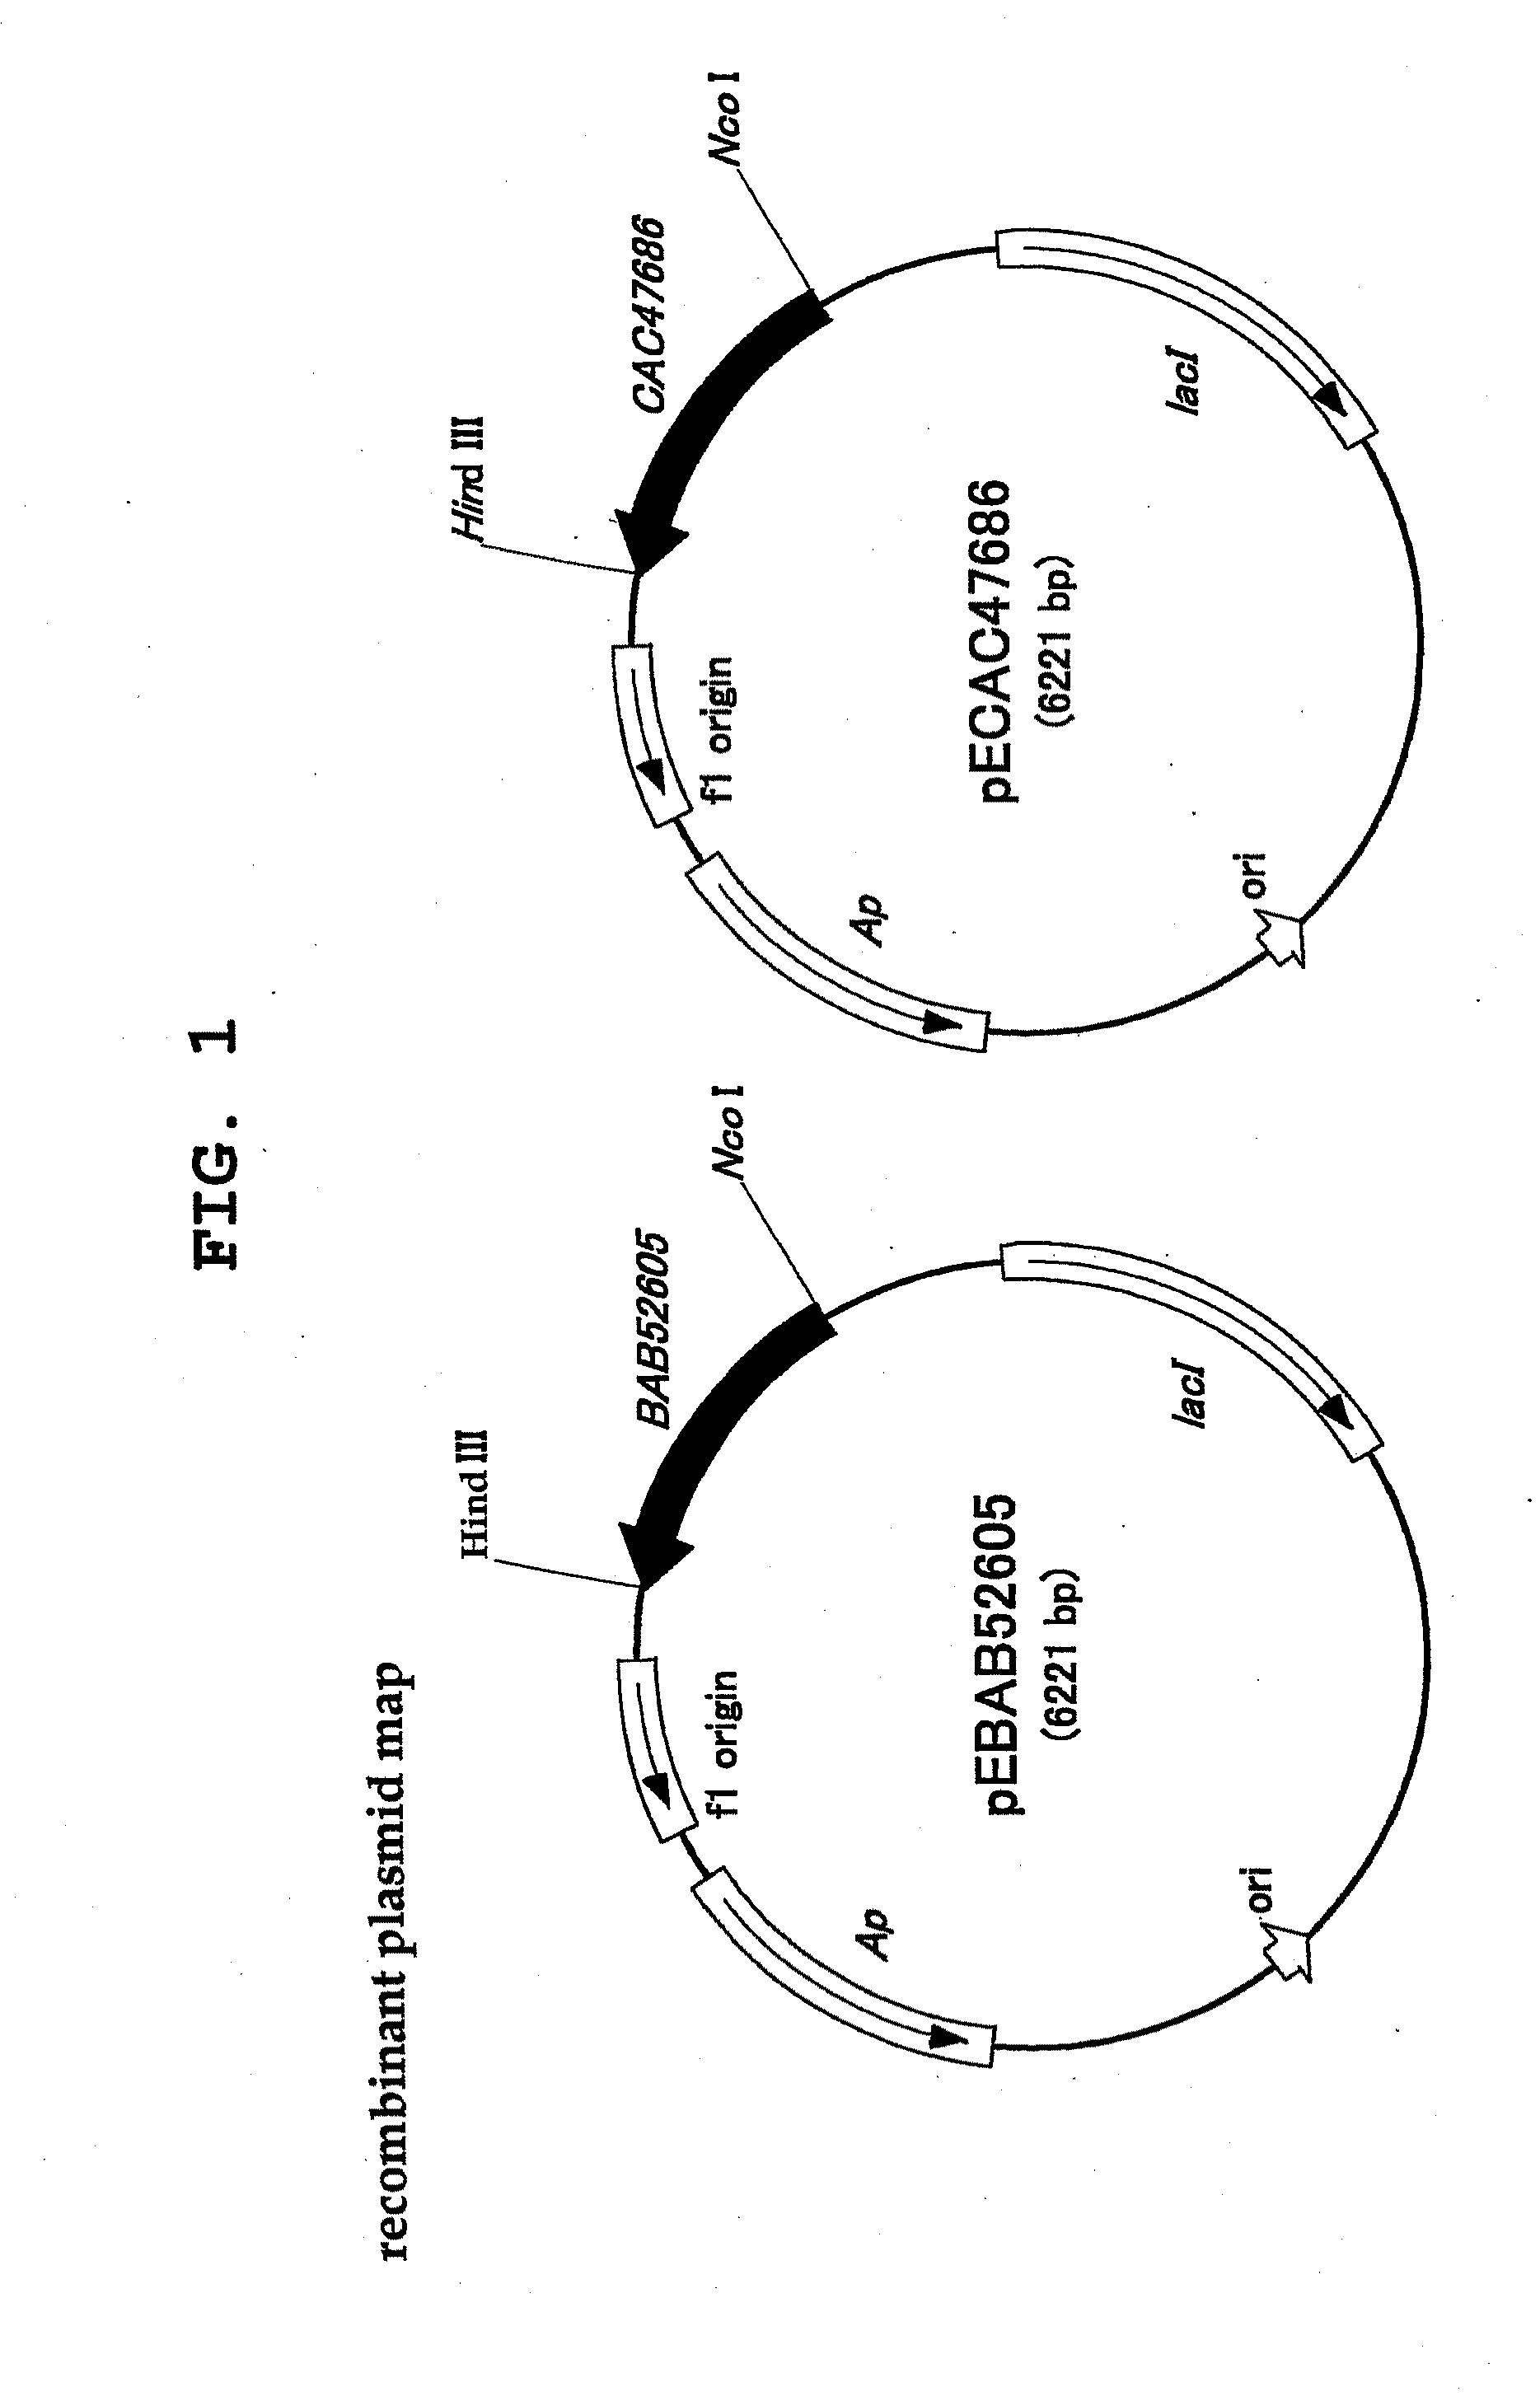 Process for production of cis-4-hydroxy-l-proline